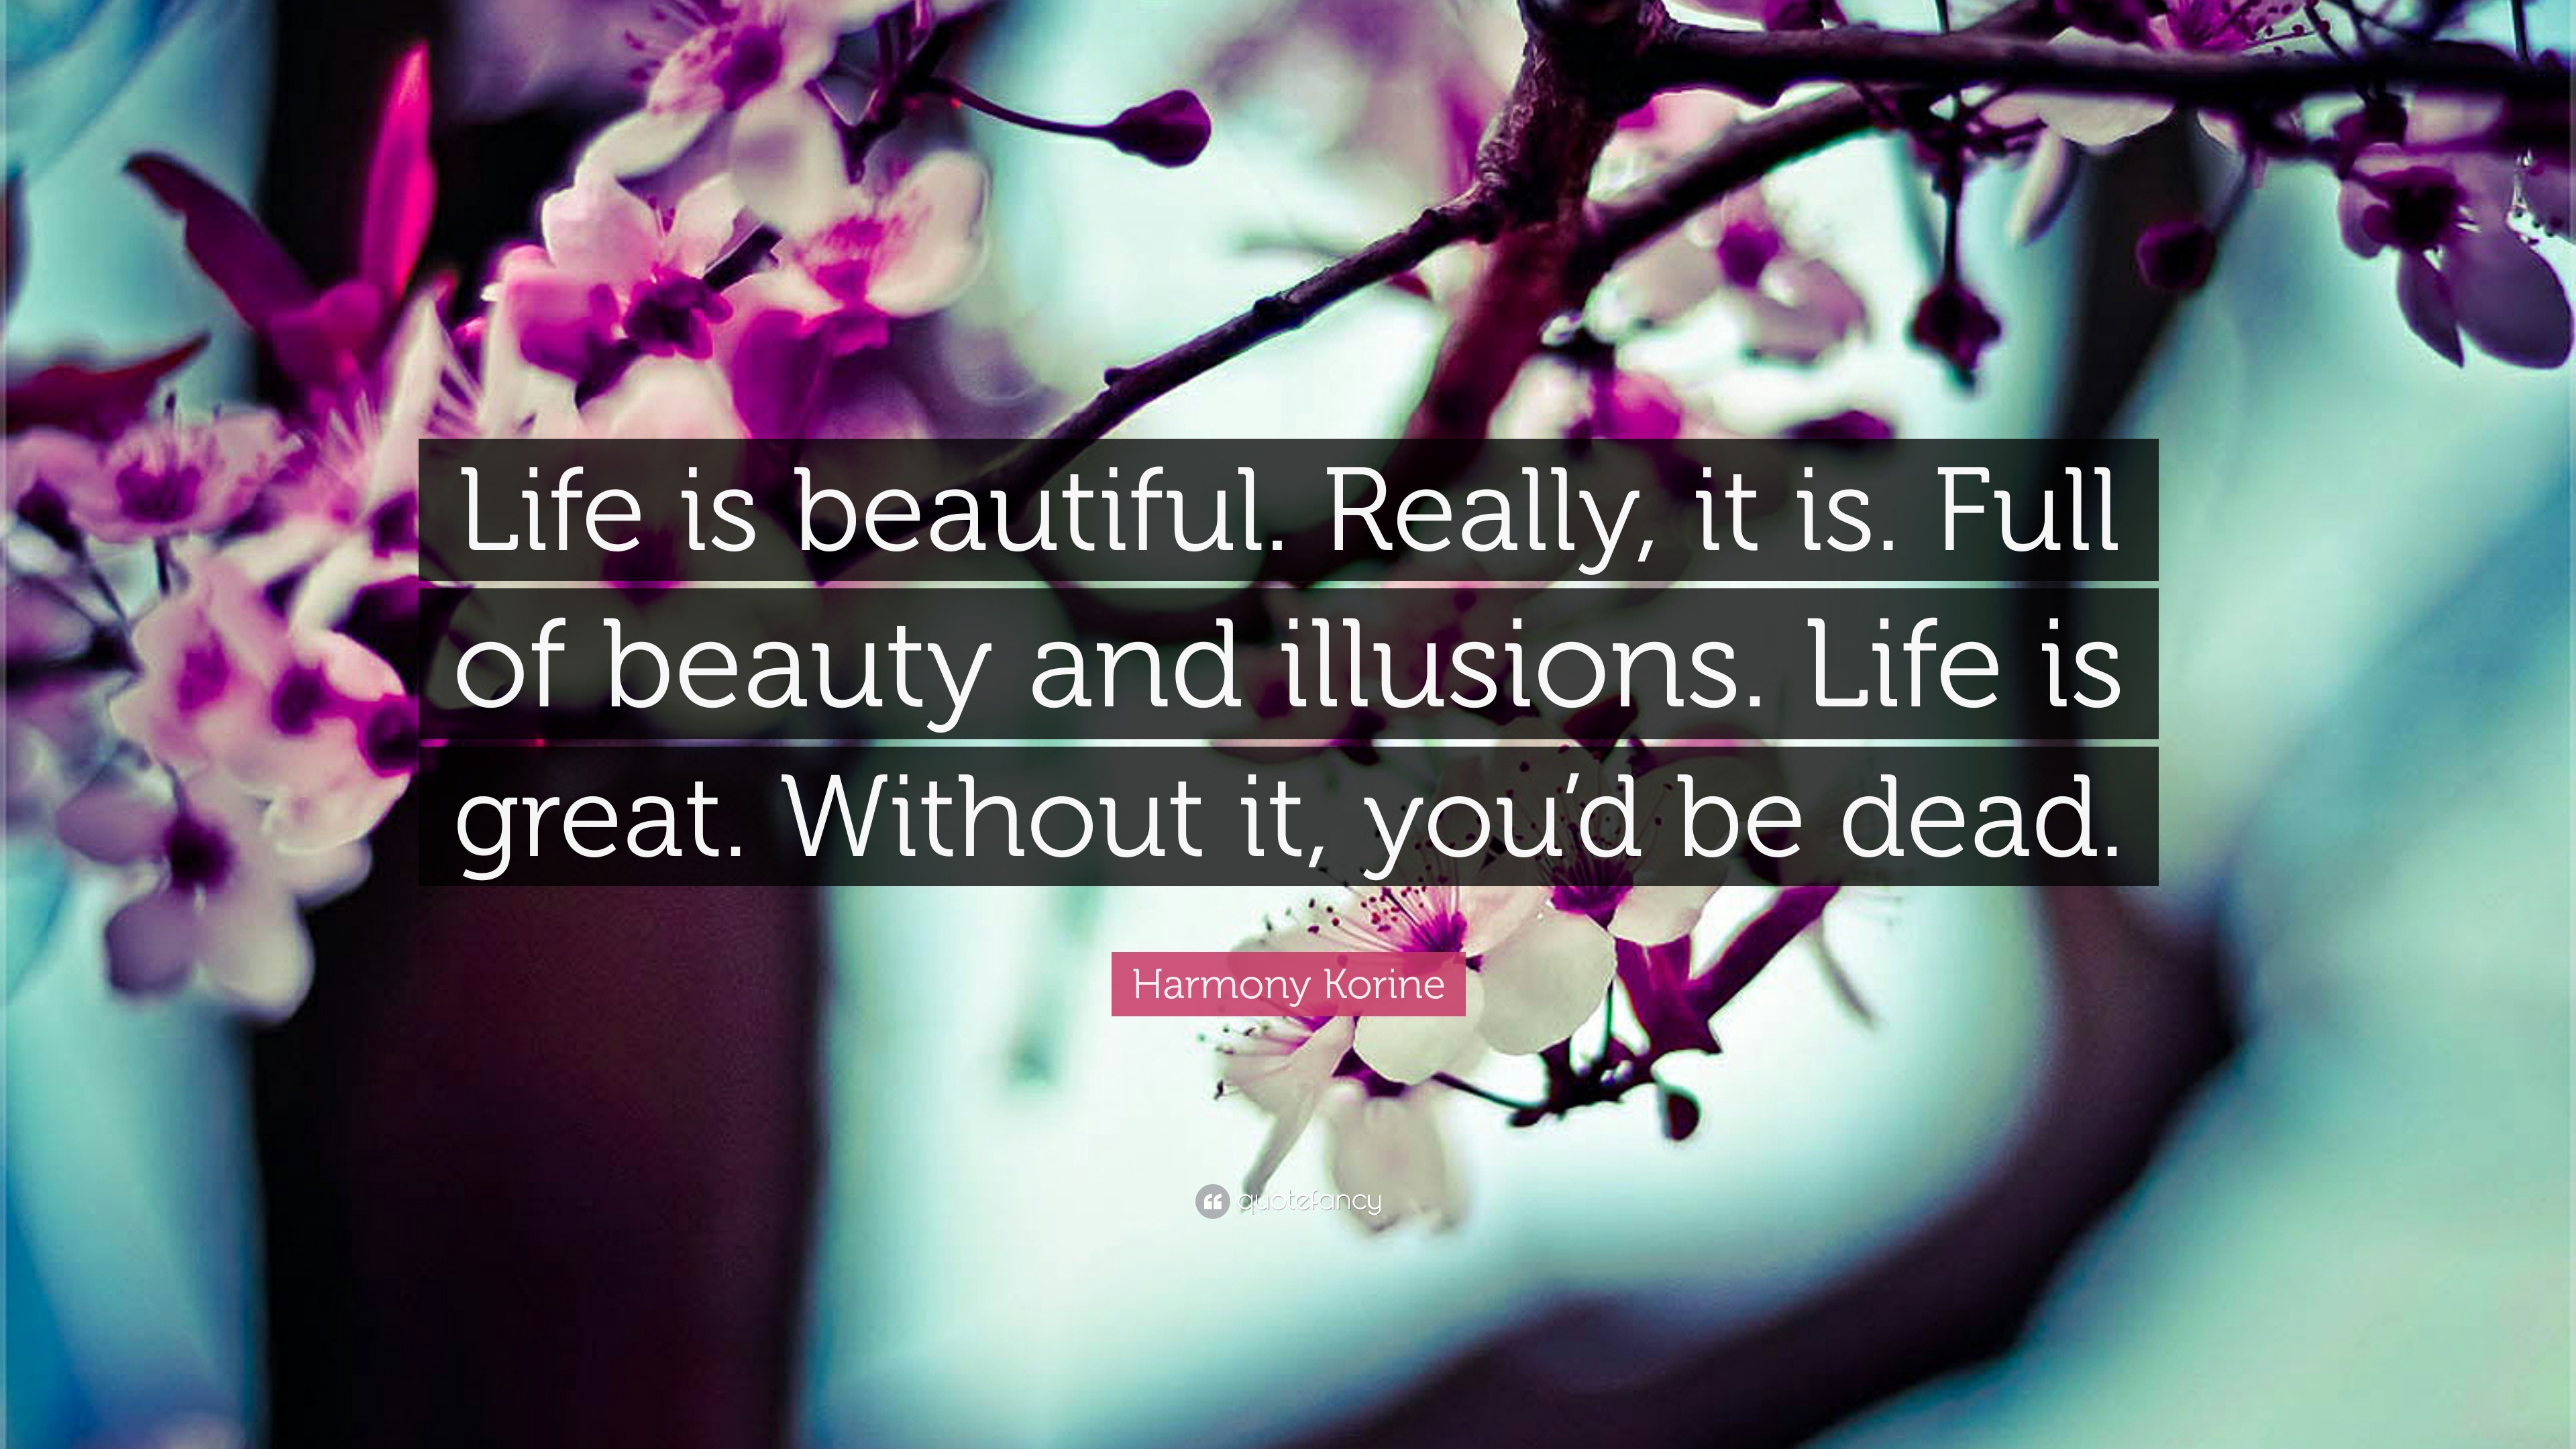 Harmony Korine Quote “Life is beautiful Really it is Full of